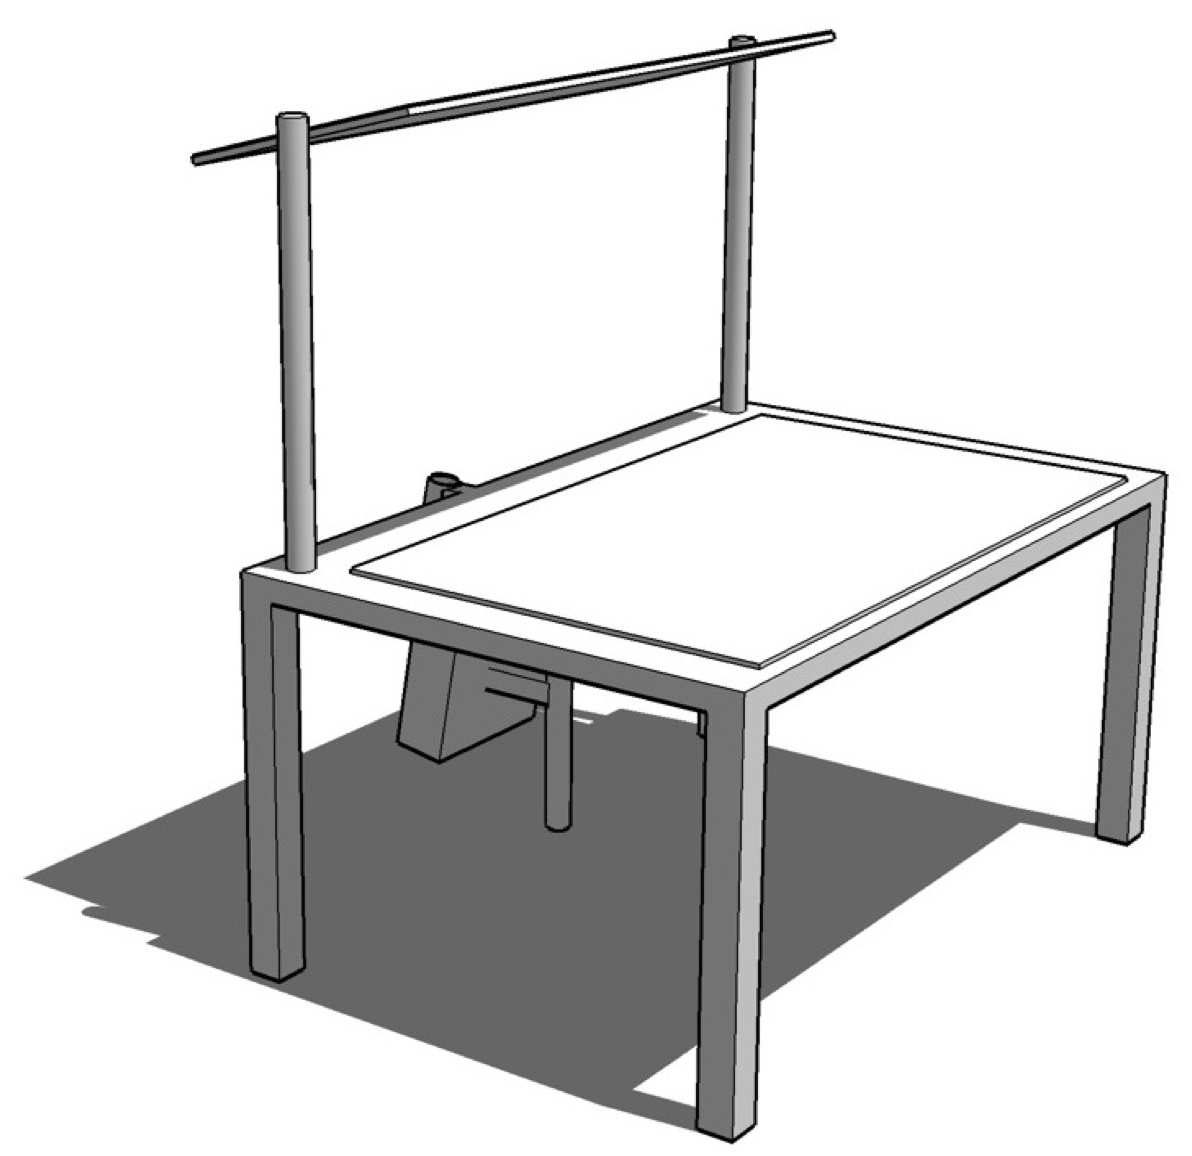 Diagram of the interactive table prototype.